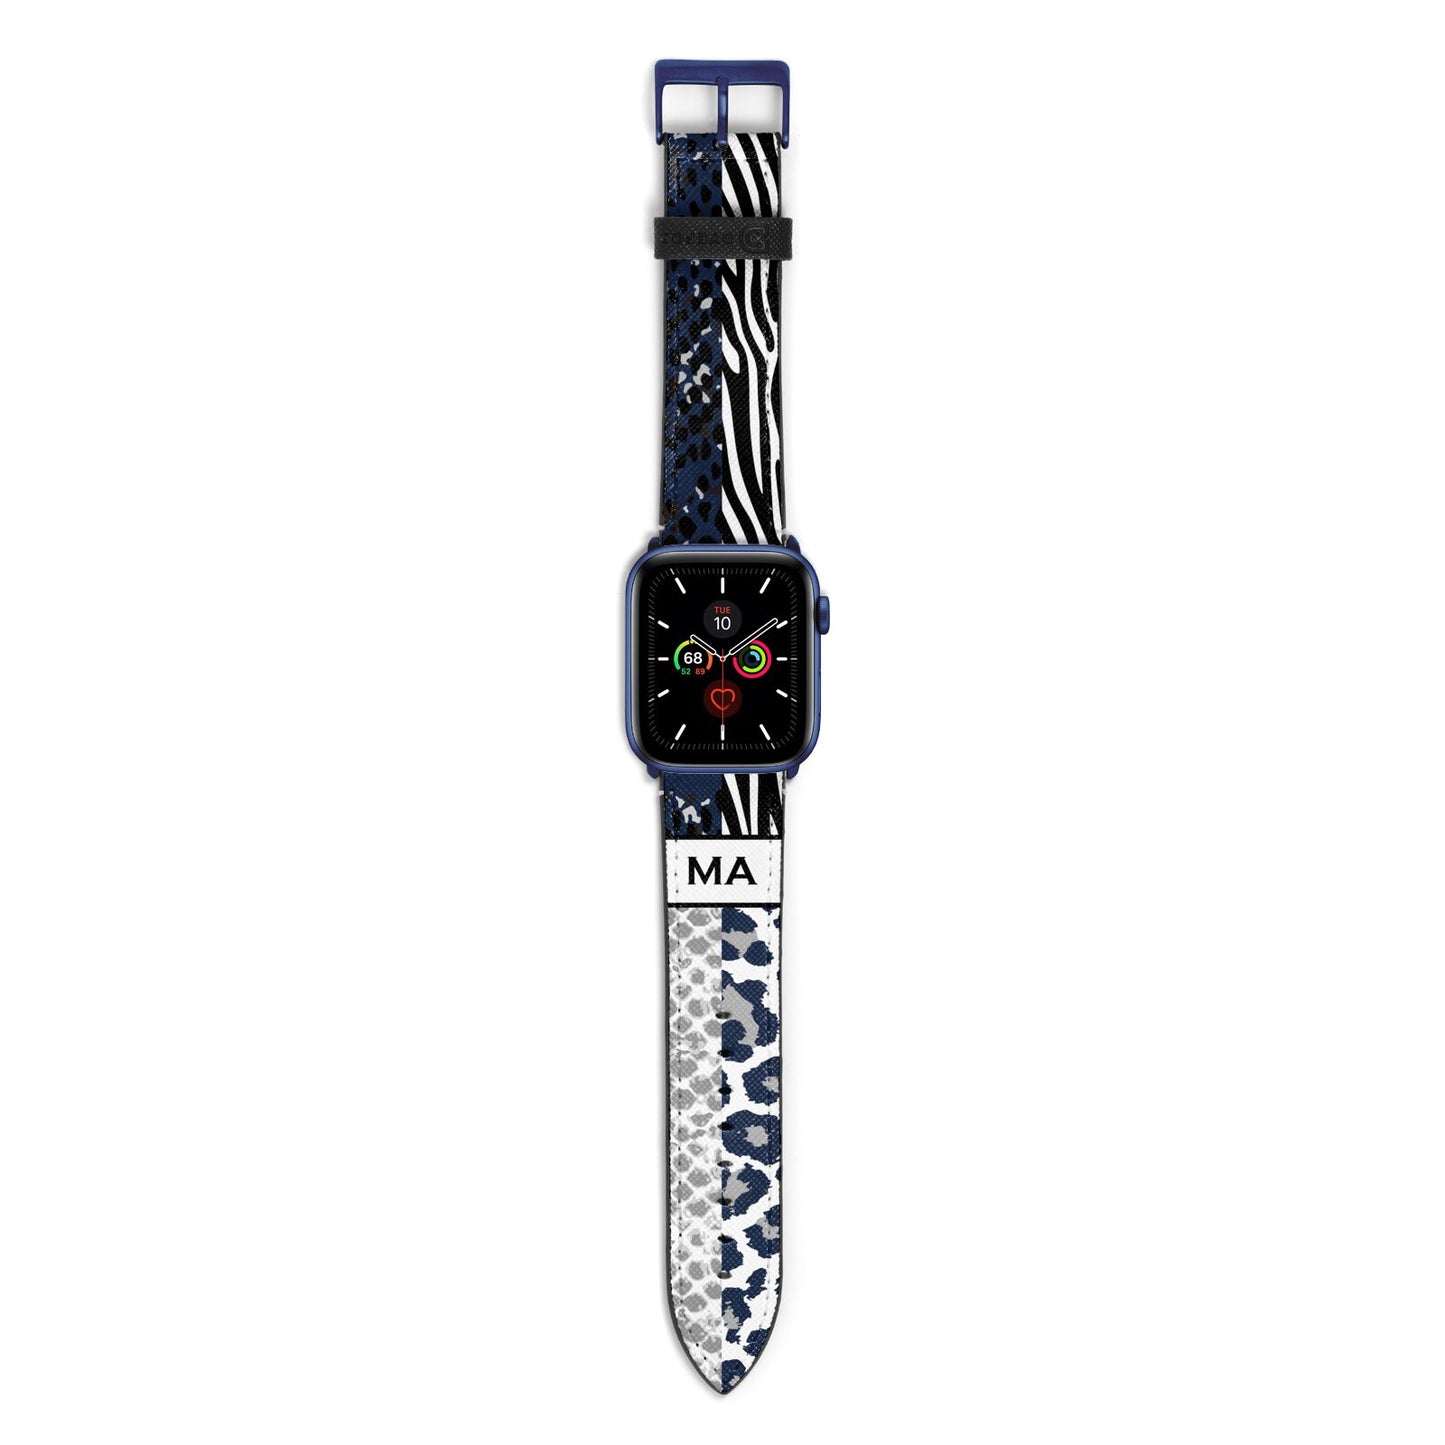 Personalised Animal Print Apple Watch Strap with Blue Hardware